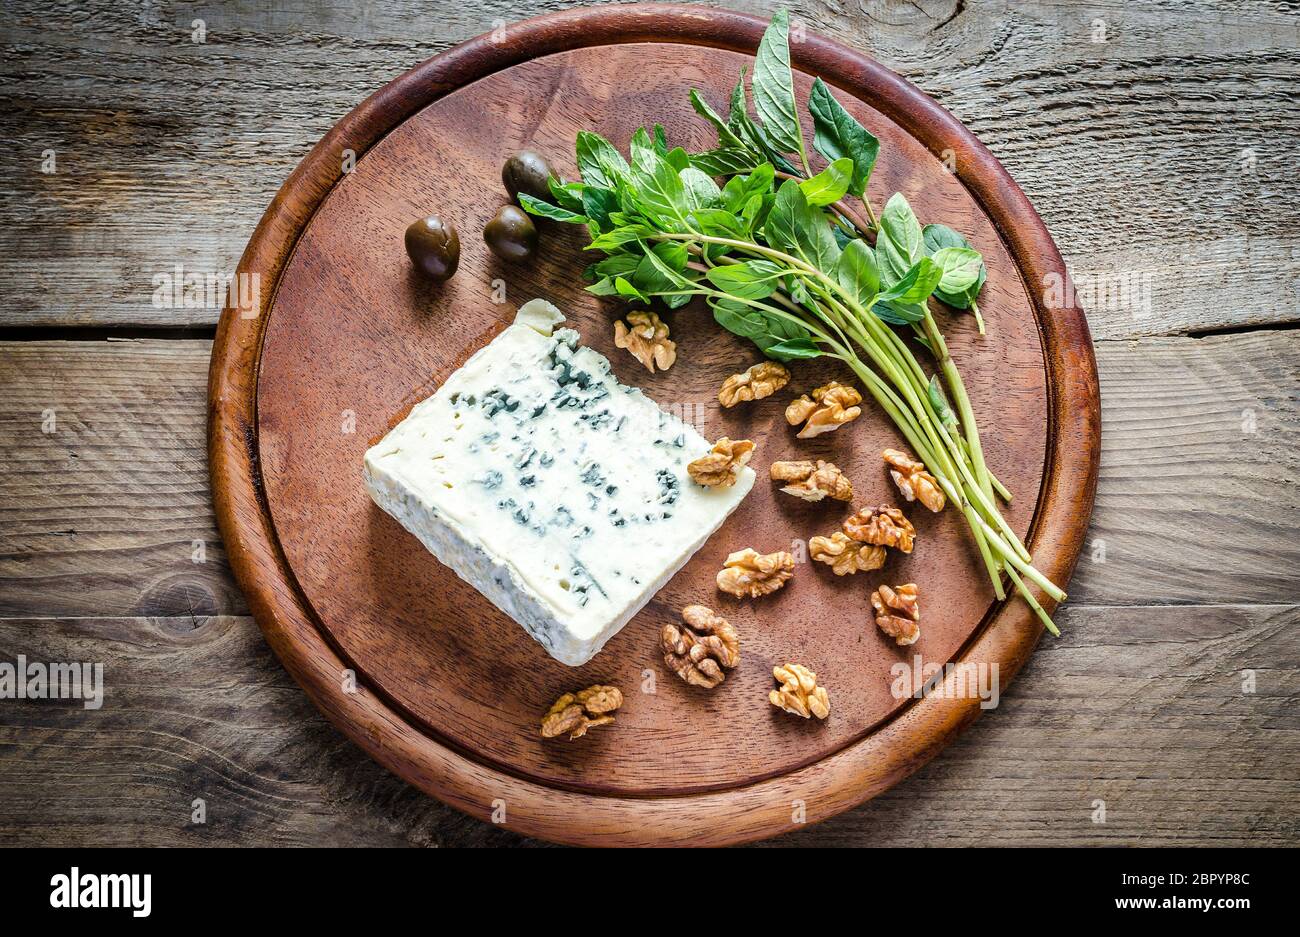 Blue cheese with walnuts Stock Photo